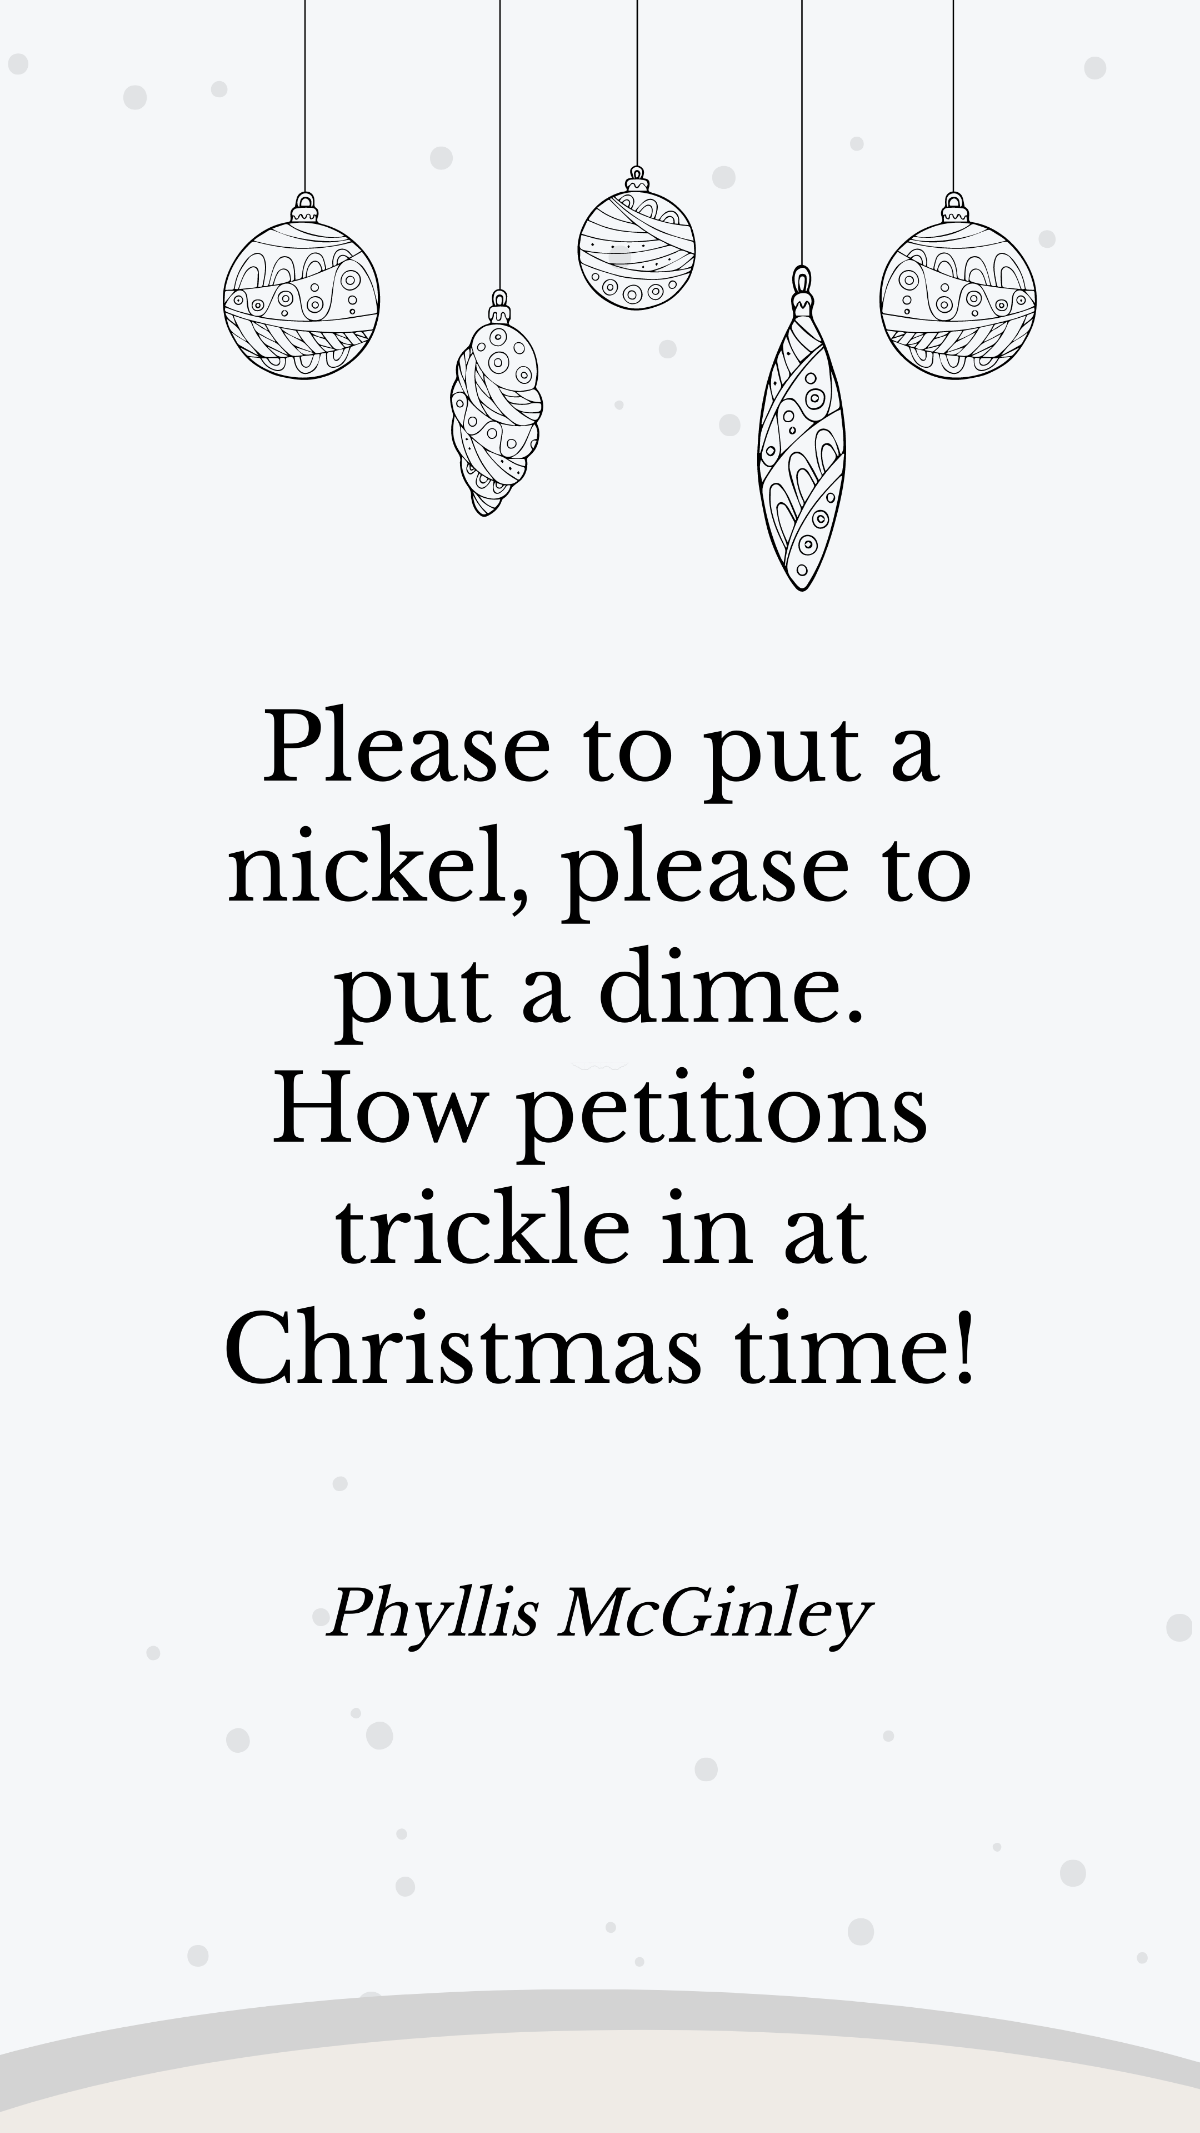 Phyllis McGinley - Please to put a nickel, please to put a dime. How petitions trickle in at Christmas time! Template